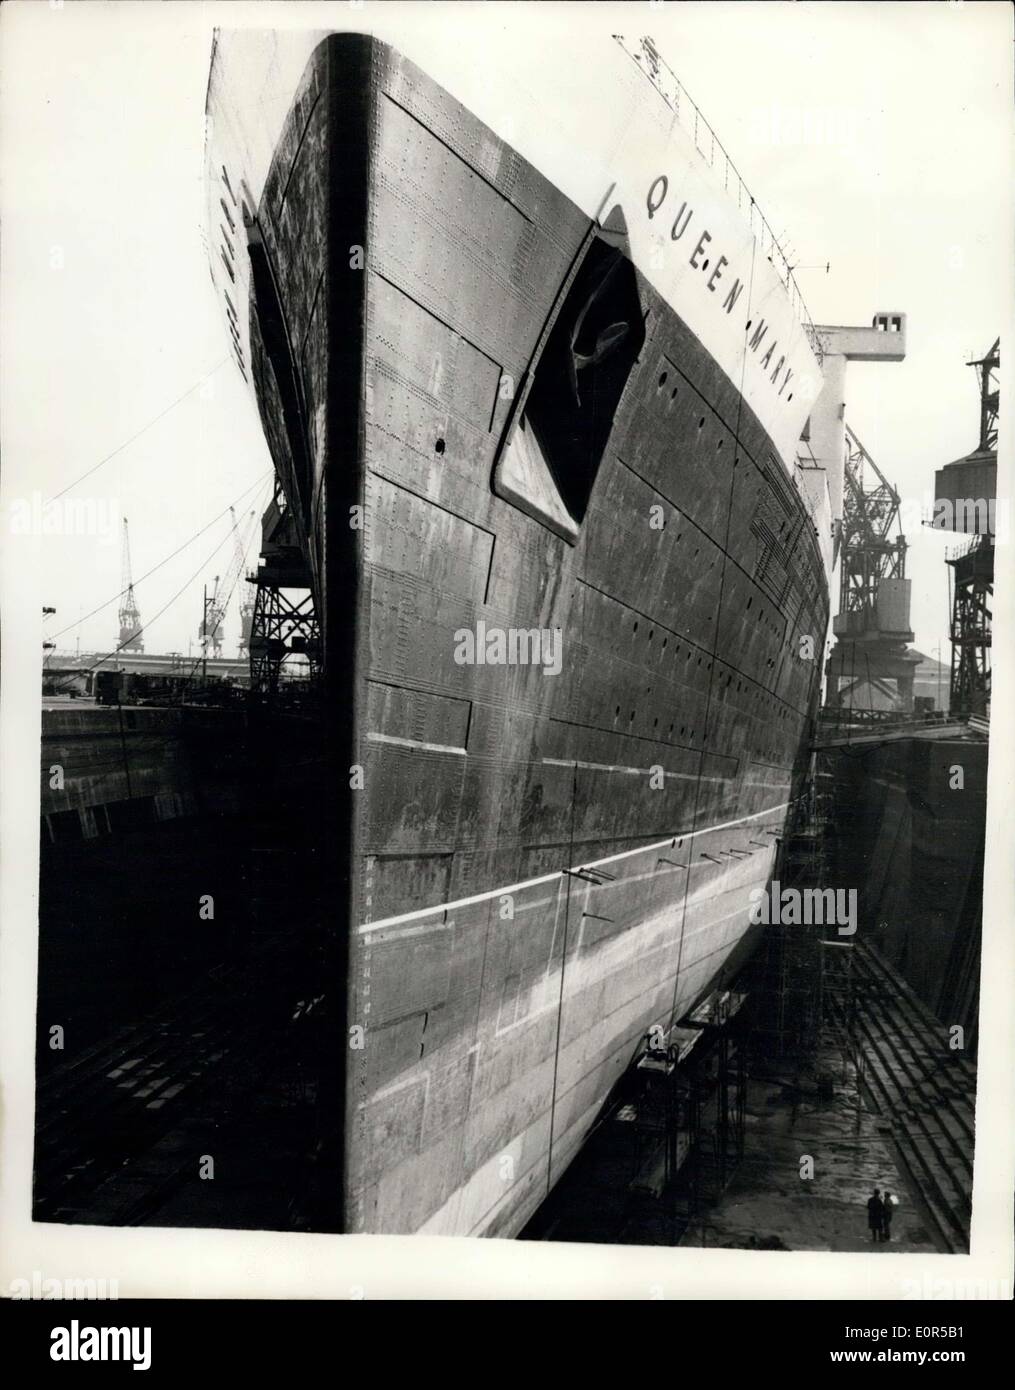 Feb. 24, 1958 - The S.S. ''Queen Mary in Dock to be fitted with ''Deiny Brown Stabilisers'': The liner S.S. Queen Mary is now in dry dock at Southampton - for the fitting of two Paris of Deiny Brown Stabilisers - to smooth out the passages from Southampton to New York. The Queen Elizabeth has already been fitted with them. Photo shows Looking at the razor-like bows of the Queen Mary in dry dock at Southampton. Stock Photo